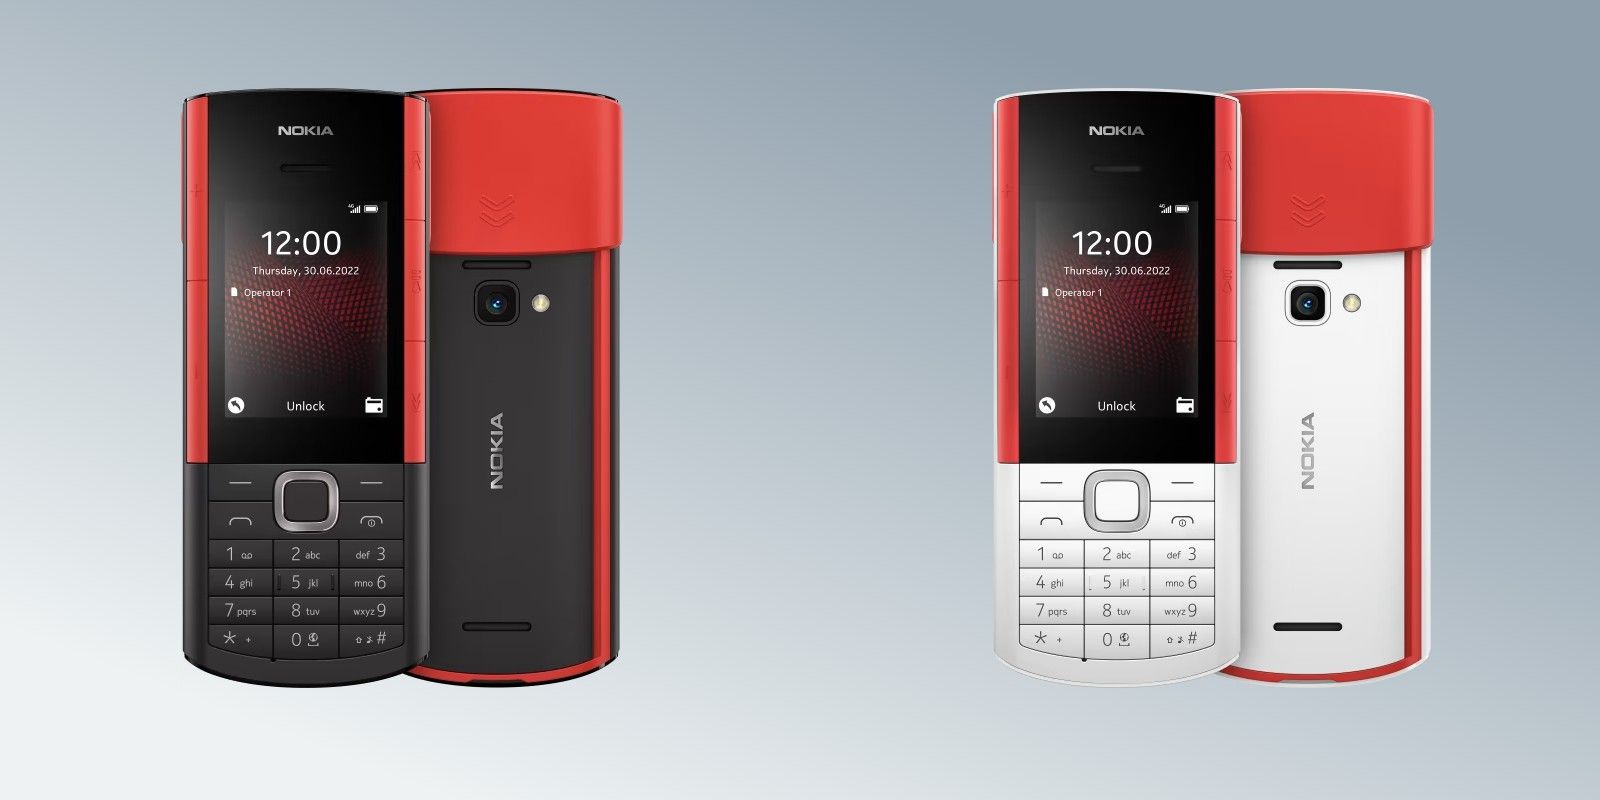 Nokia 5710 XpressAudio is available in two colors